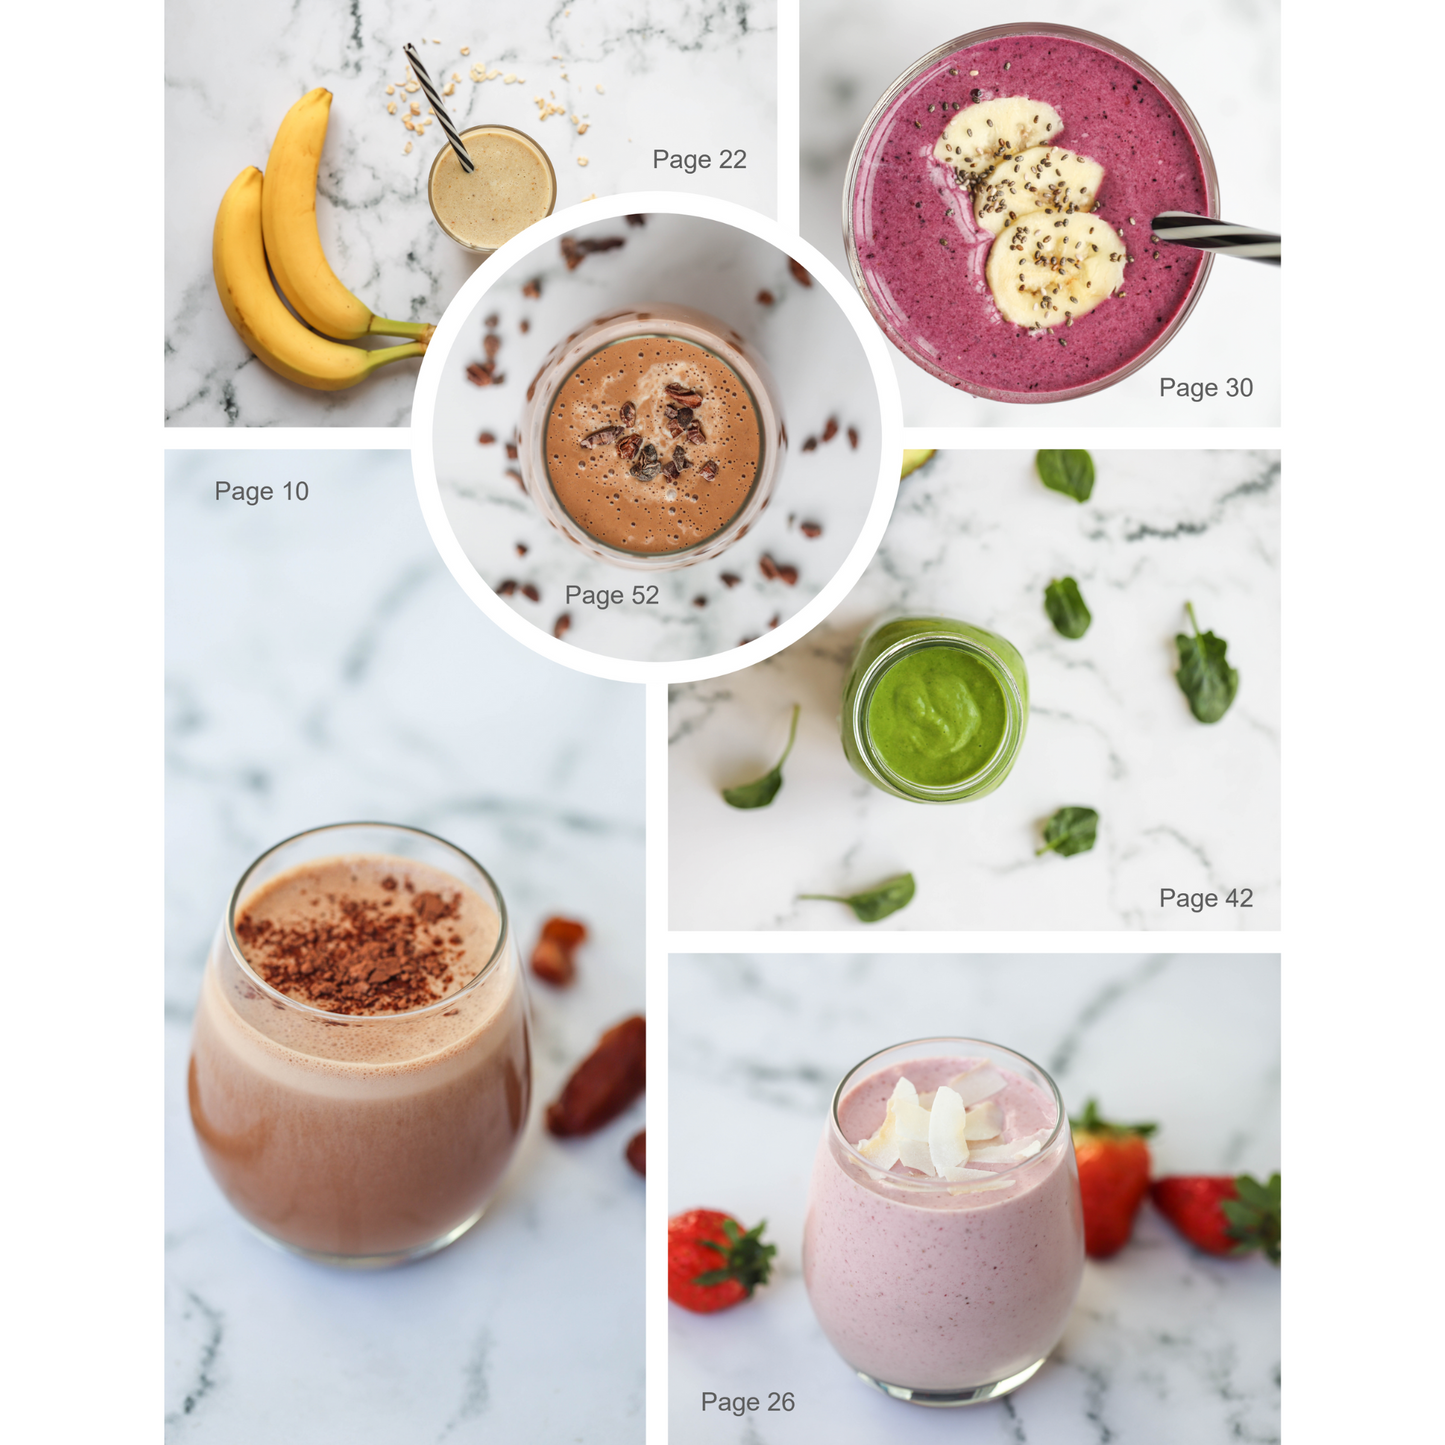 Cookbook - Smoothie Recipes - Healthy Living Meals - Download